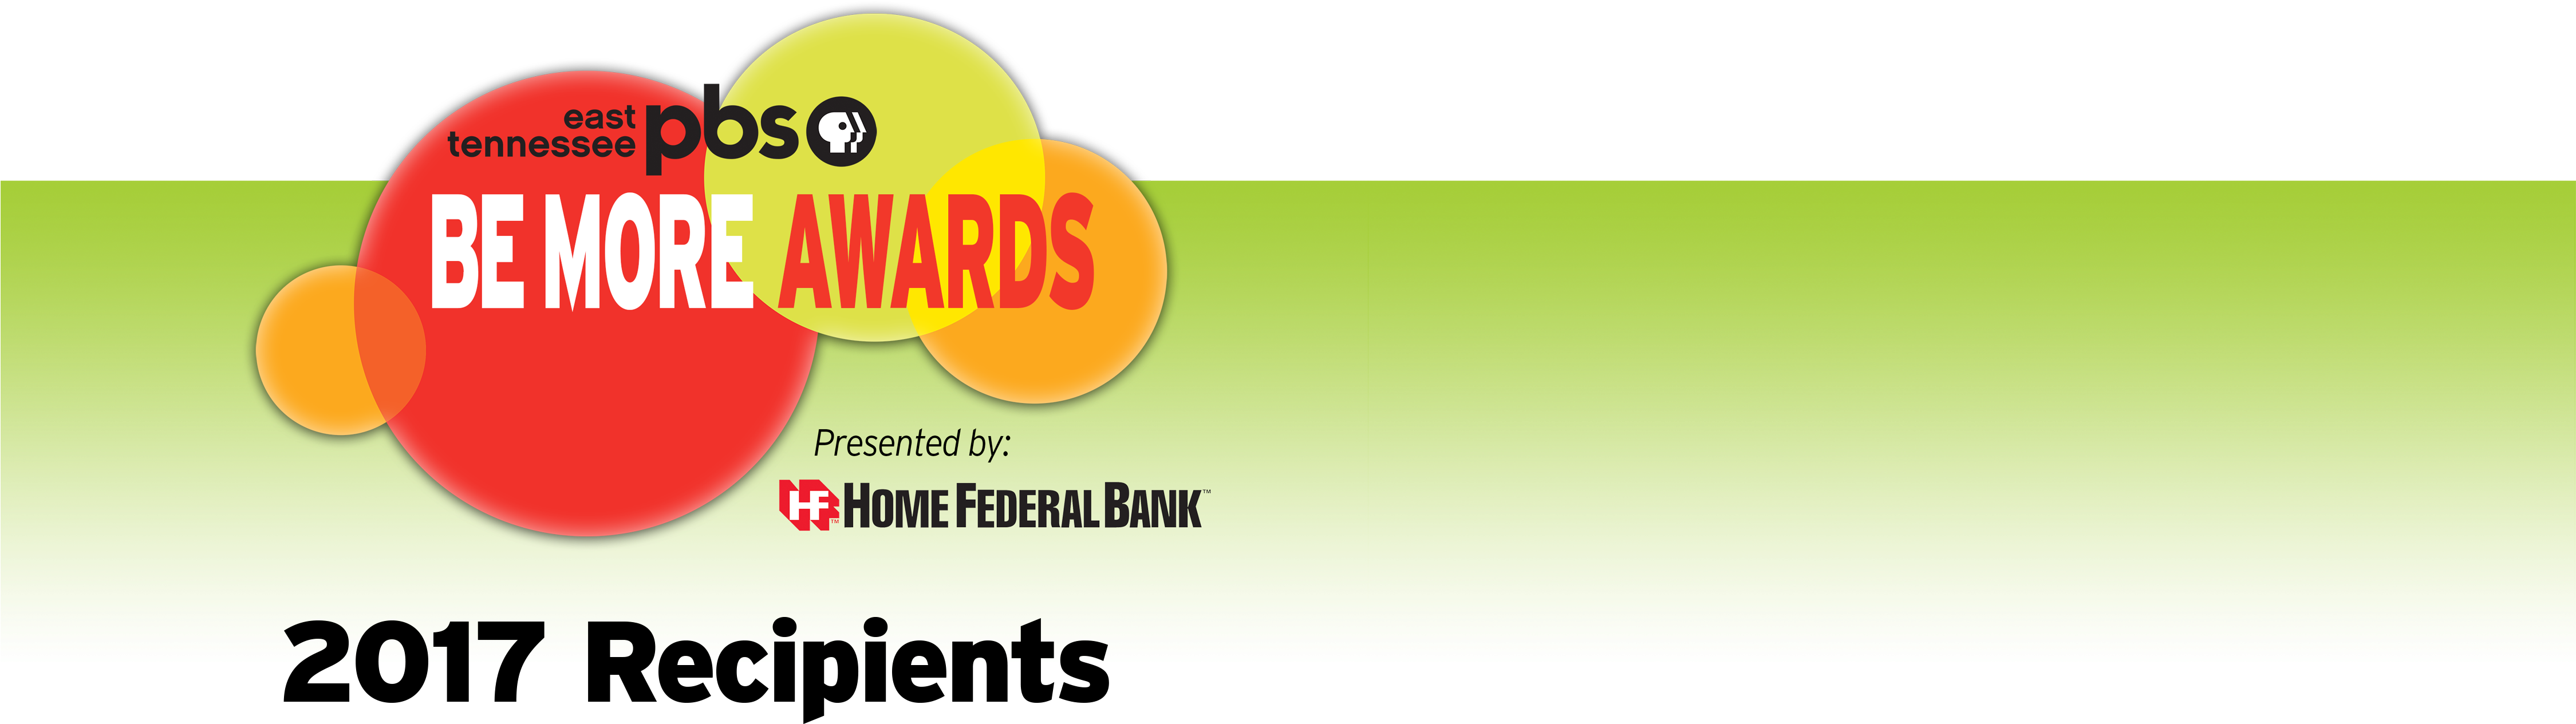 2017 Be More Awards Presented By Home Federal Bank - East Tennessee Pbs (4500x1489), Png Download